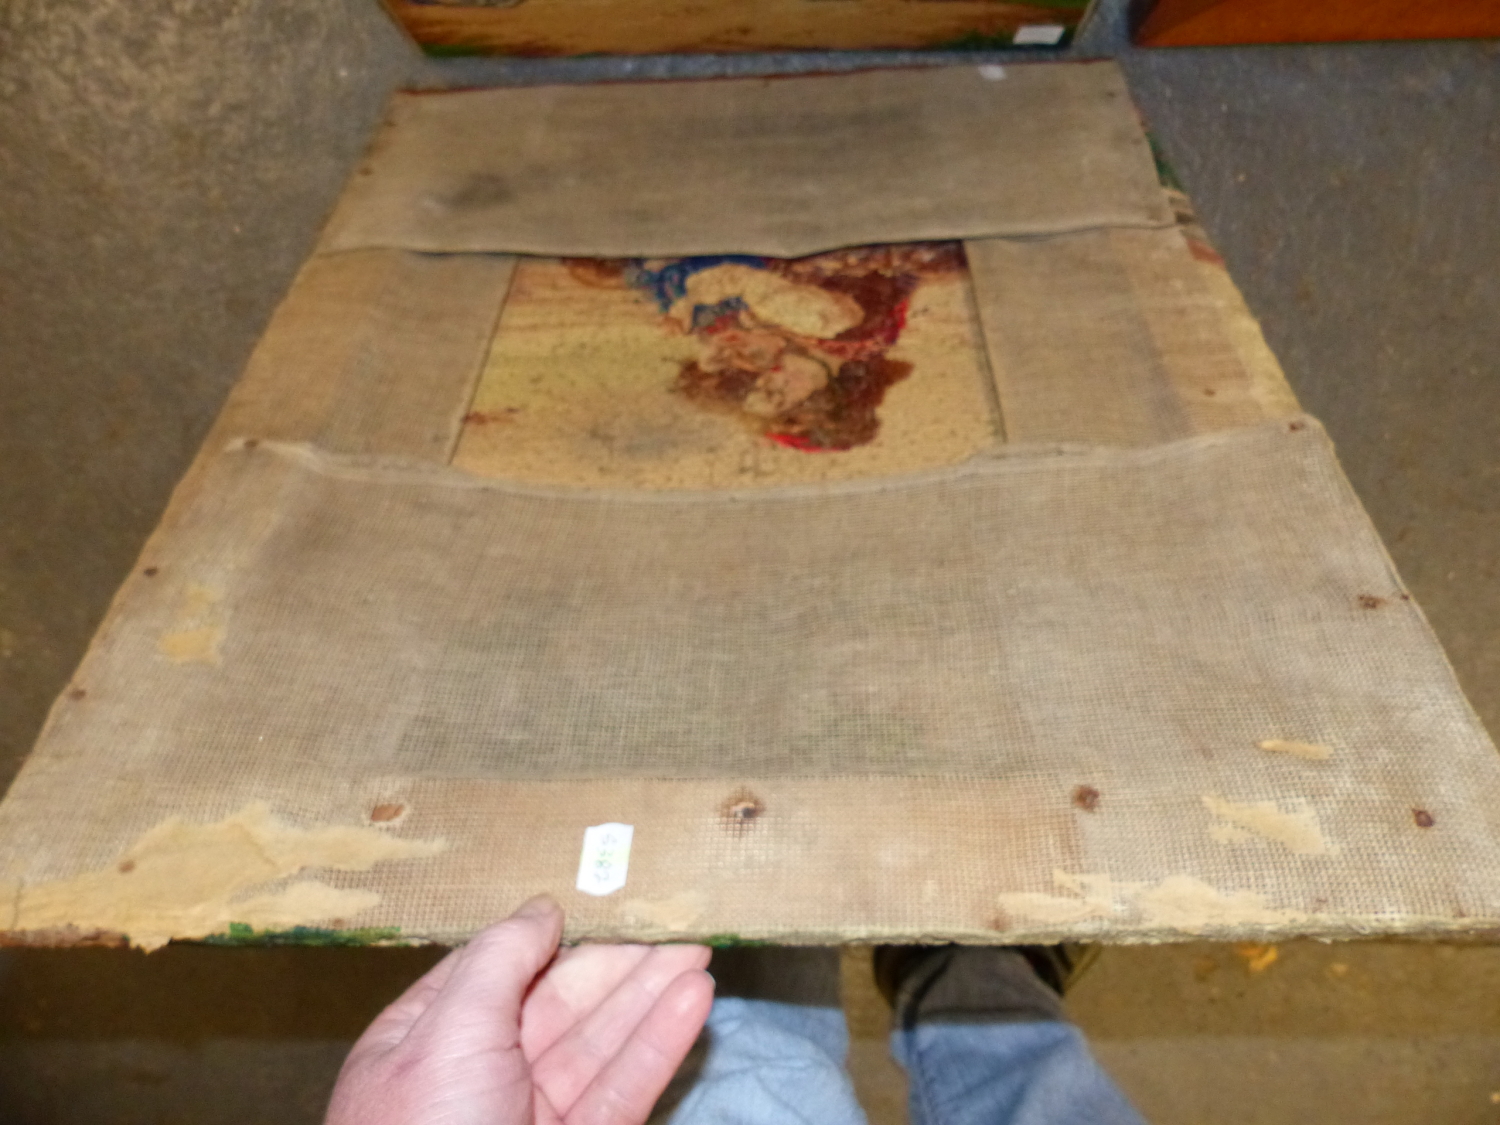 TWO UNFRAMED BERLIN WOOL WORK PICTURES, ONE DEPICTING AN ANGEL PLAYING TO THE MADONNA, CHILD AND - Image 3 of 6